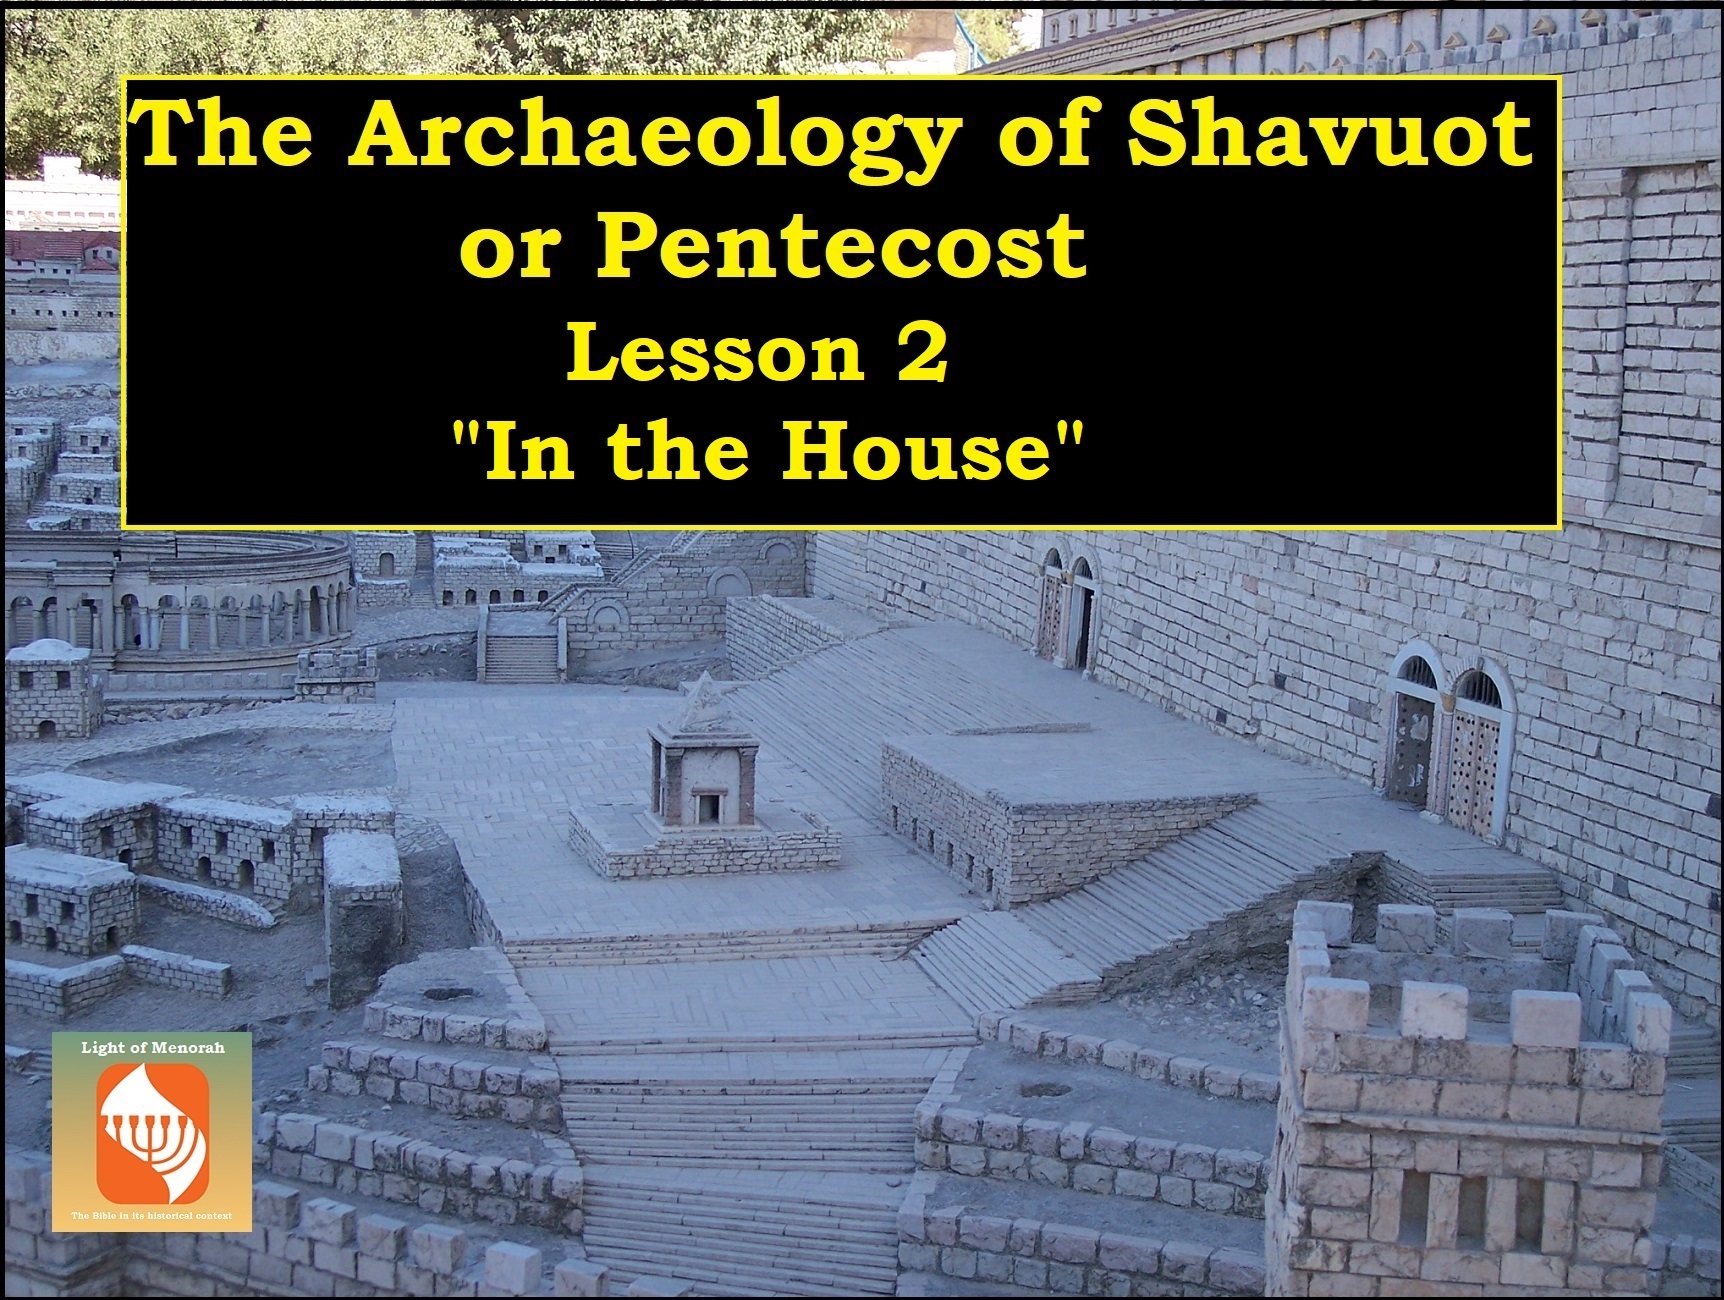 arch_of_shavuot_lesson_2_7nn93.jpg